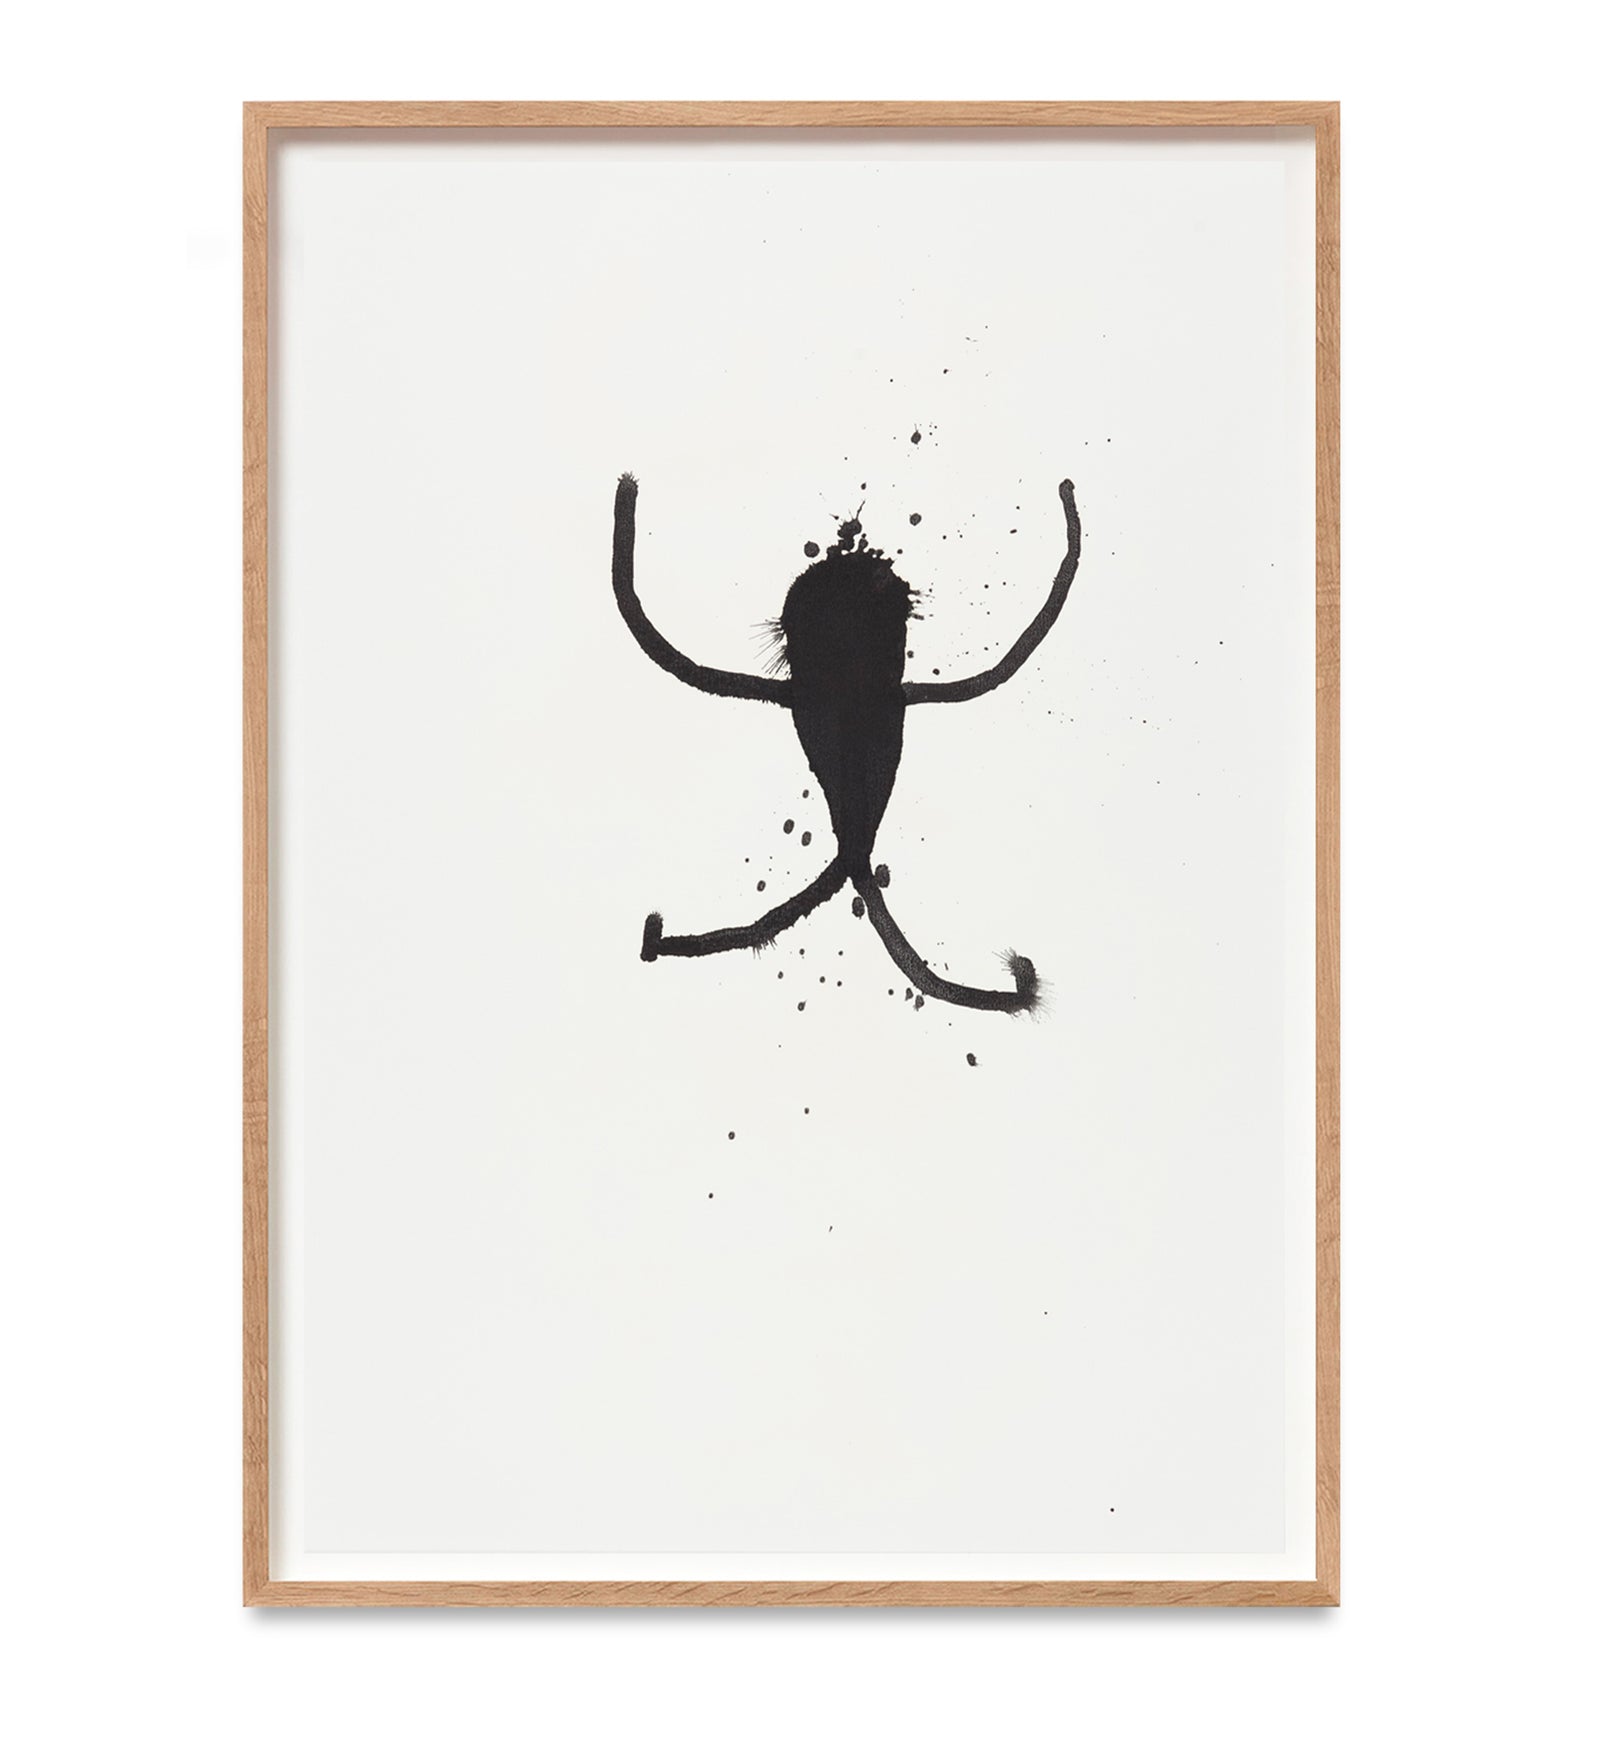 Black Creature With Two Arms and Legs (2011)